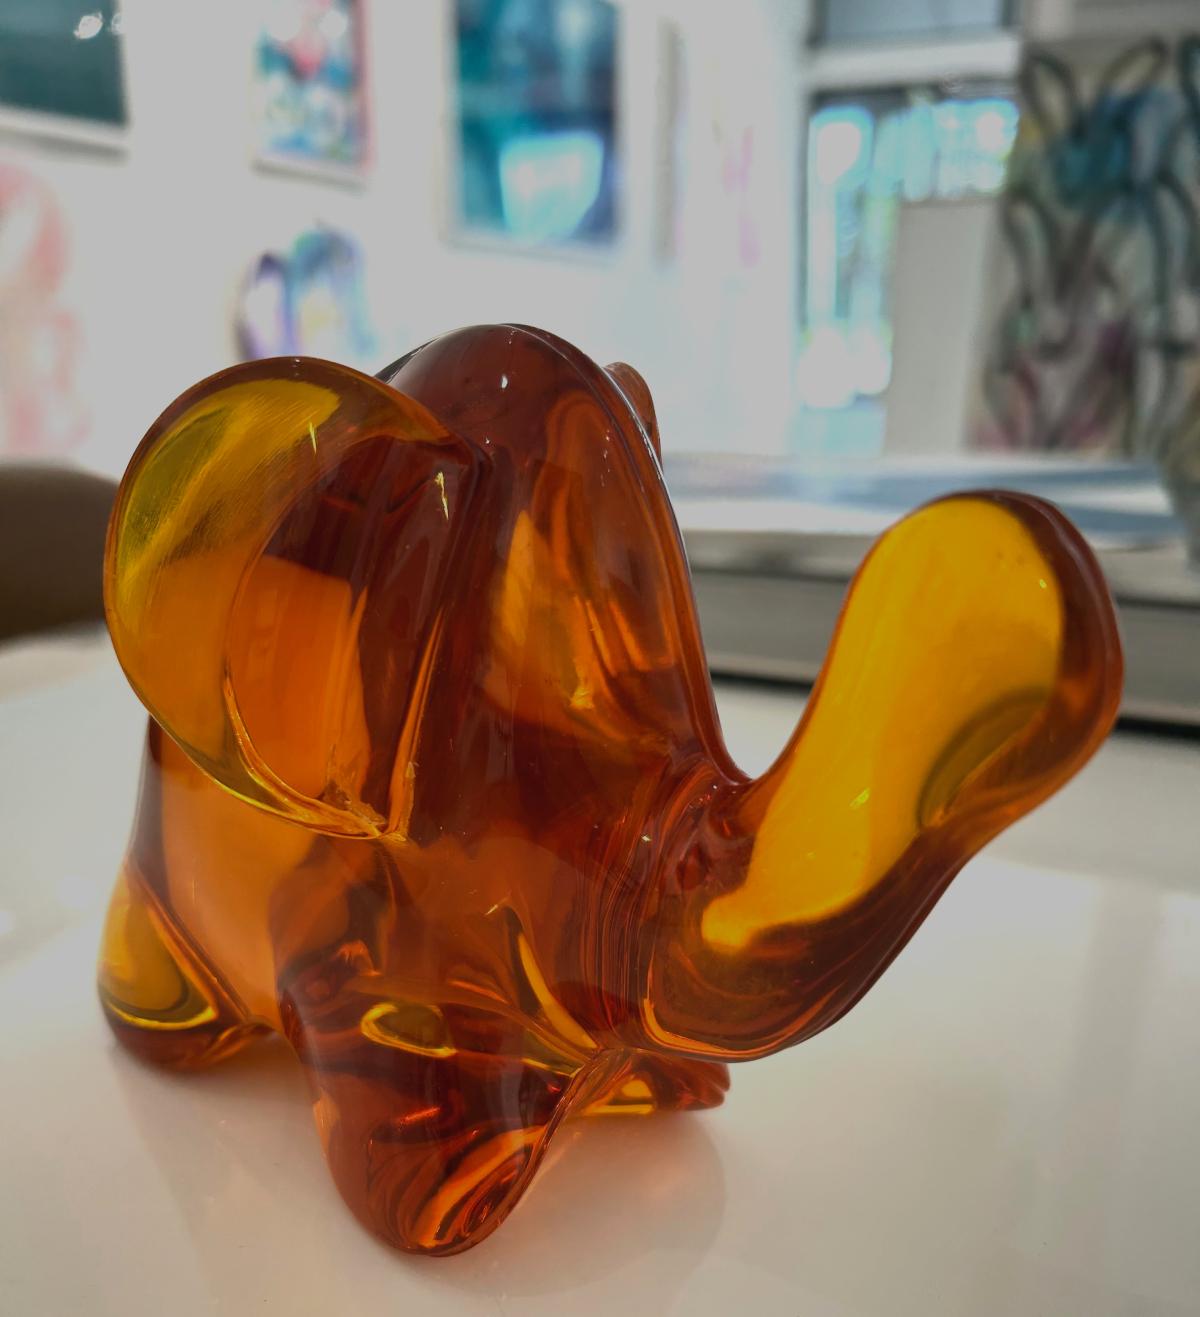 Elephant (Amber) - Edition of 100

Christopher Schulz (b. 1974) works in a variety of mediums to create his sculptures and 2D wall pieces, Schulz seeks to engage the viewer in visceral interaction. Working with materials such as marine grade